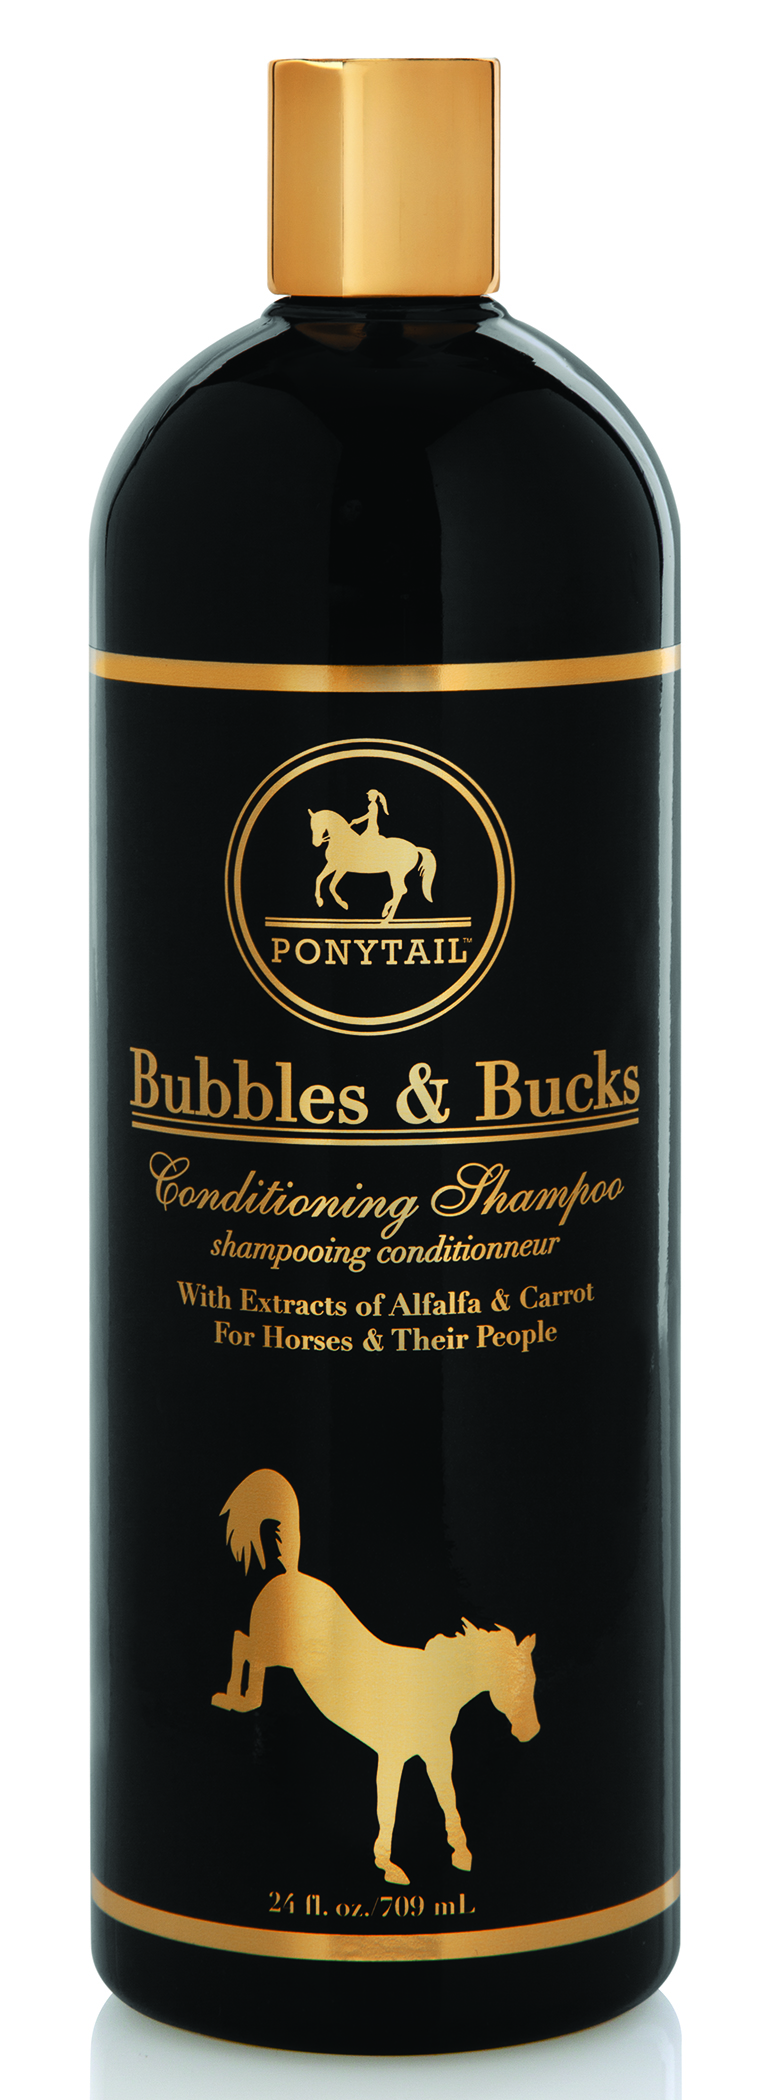 BUBBLES AND BUCKS CONDITIONING SHAMPOO FOR HORSES